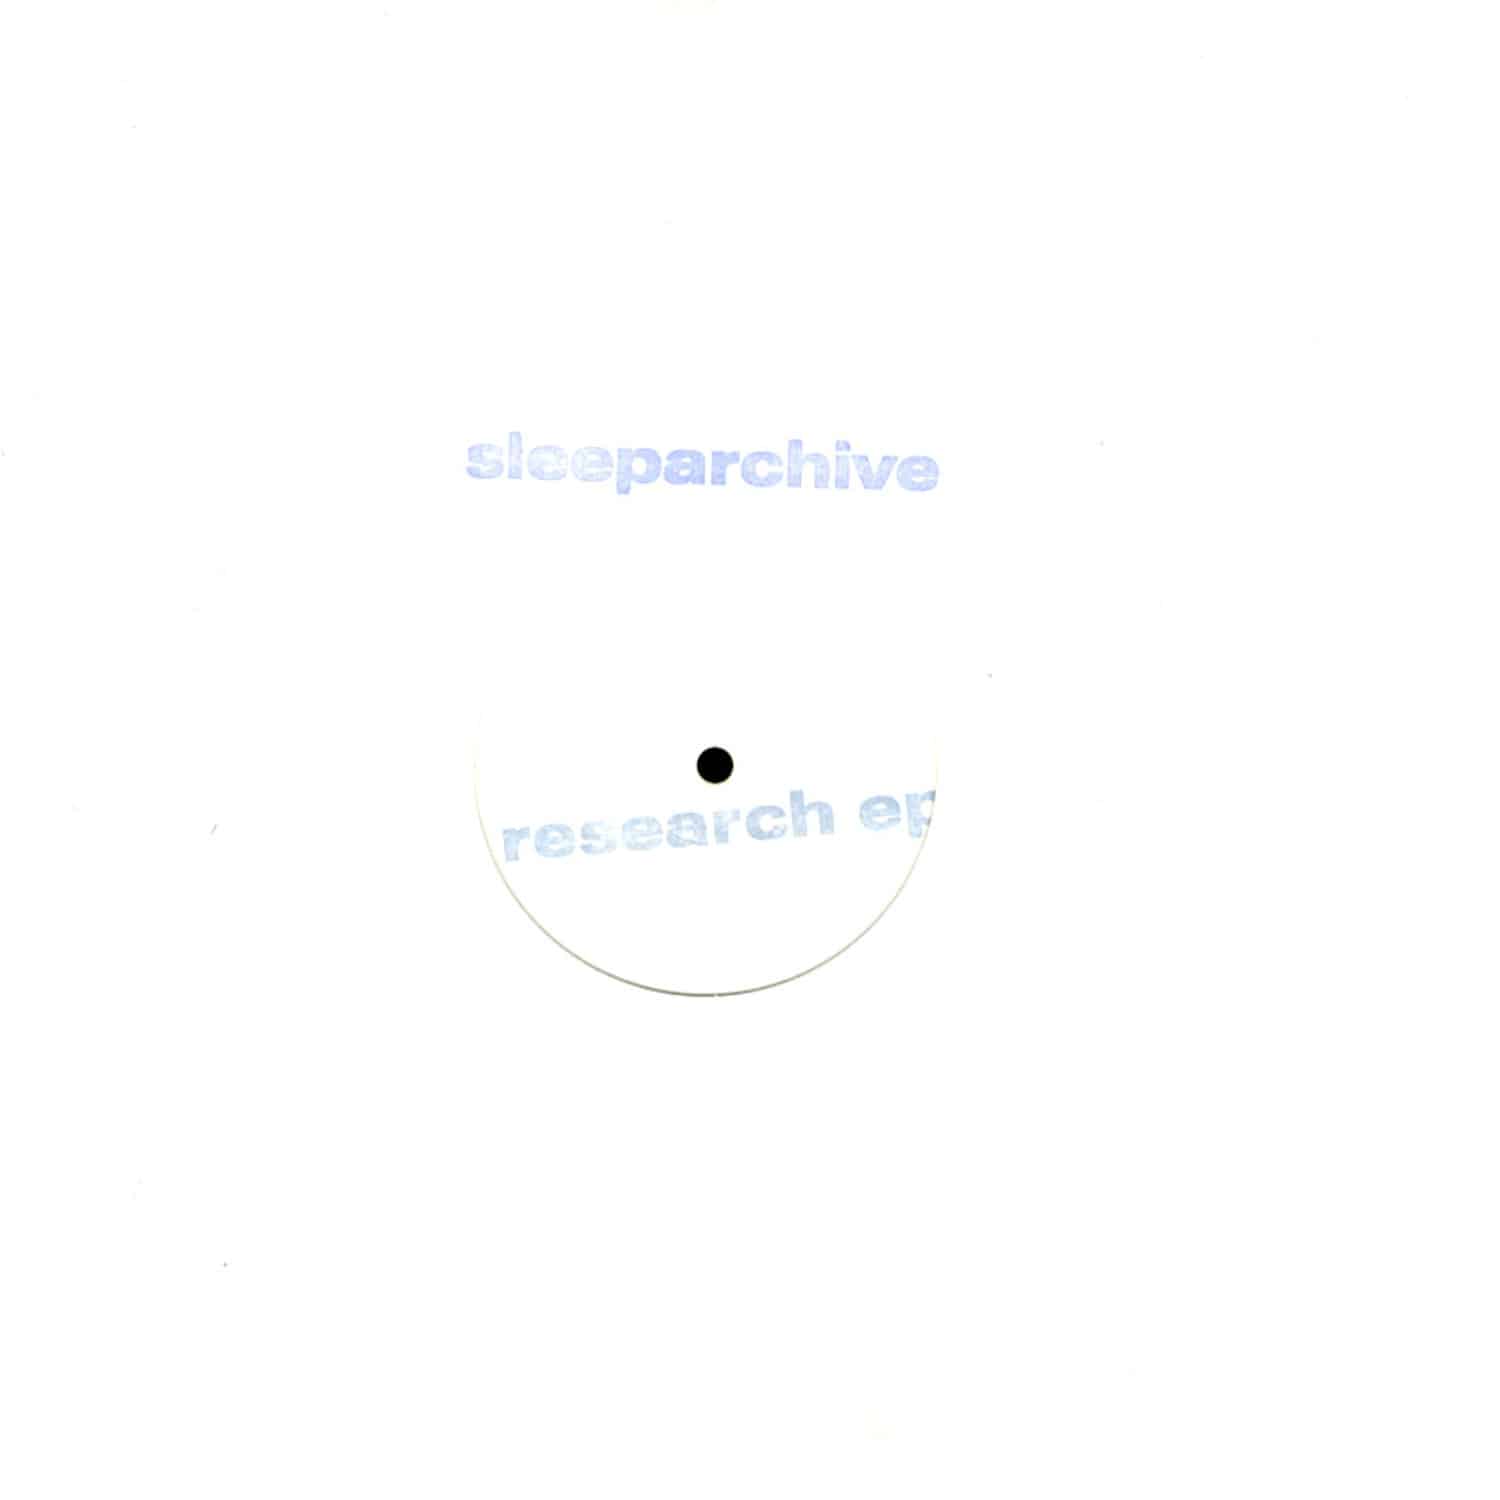 Sleeparchive - RESEARCH